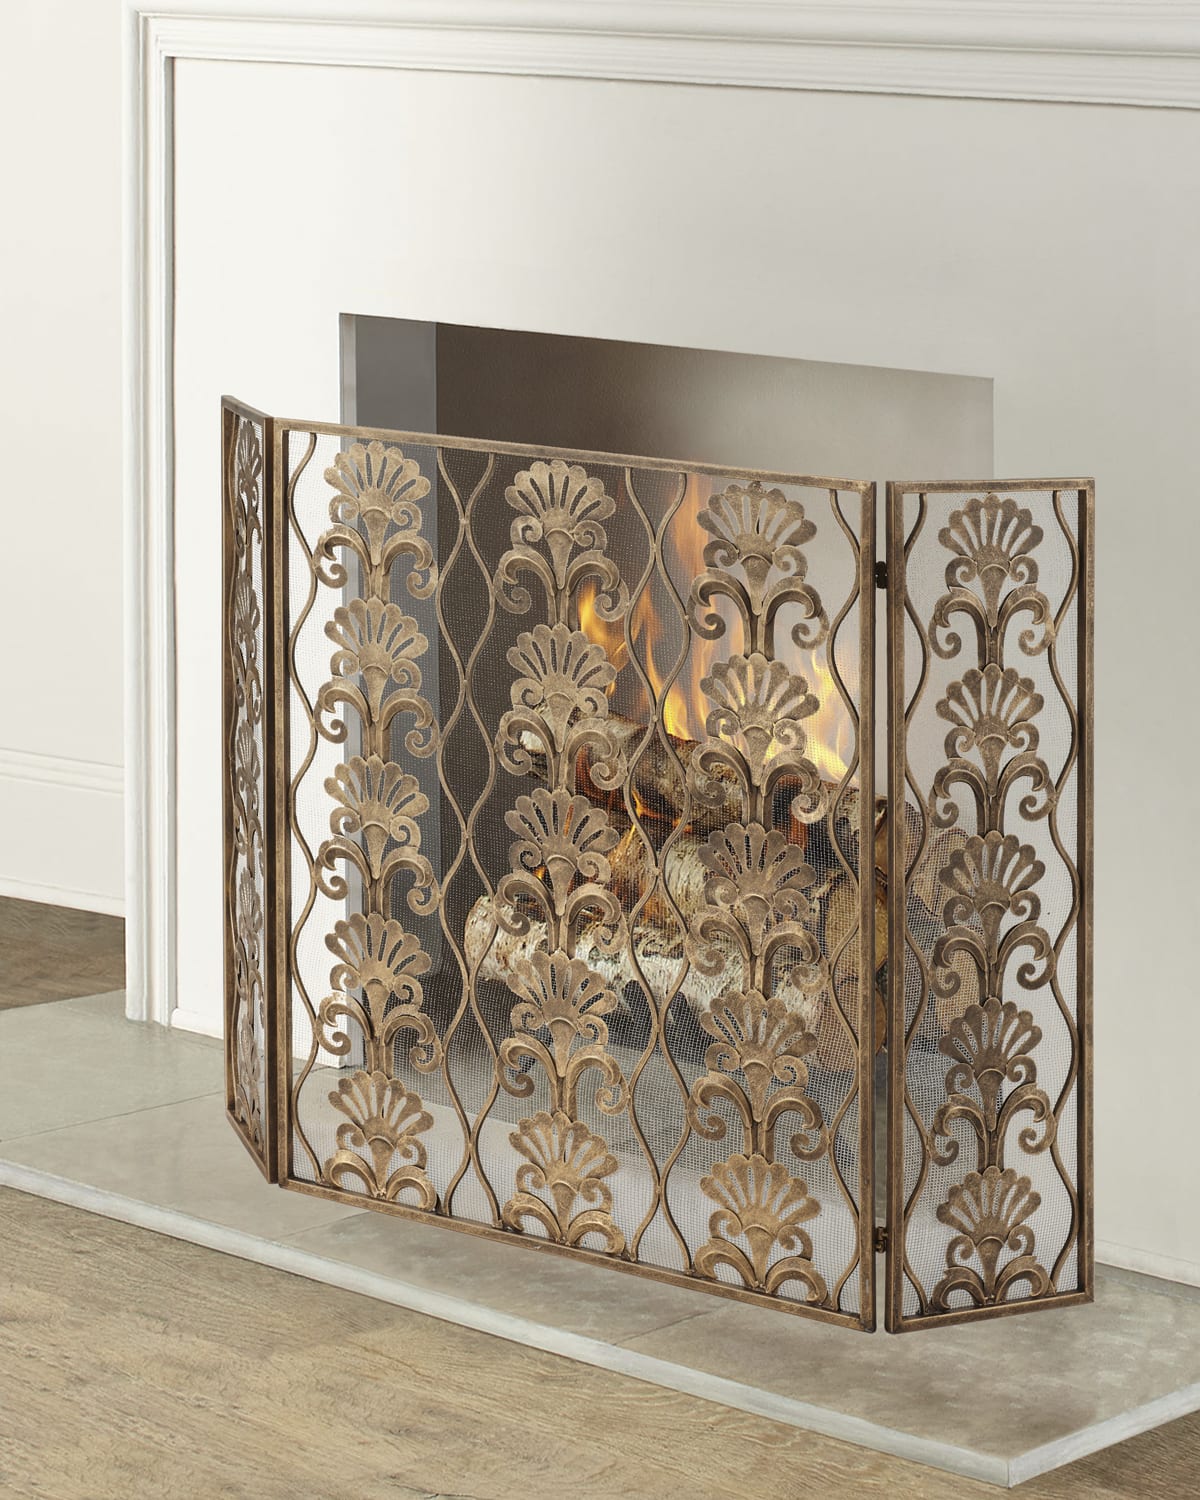 NEW Horchow lexington Single Panel Burnished Gold Finish Fireplace Screen Modern 